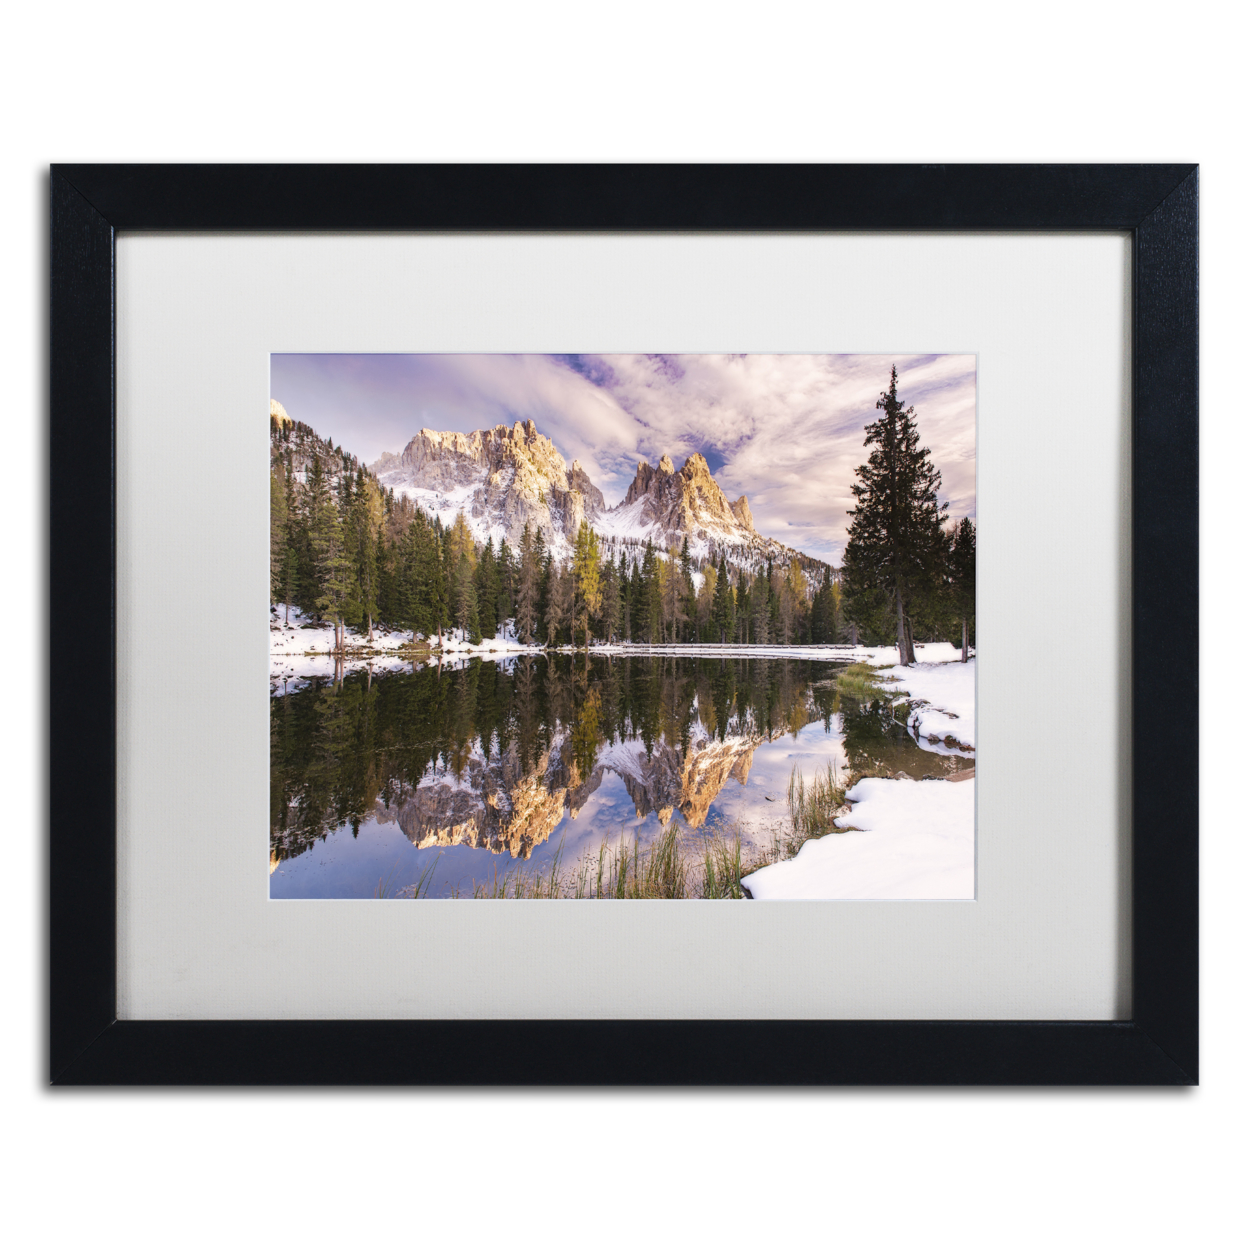 Michael Blanchette Photography 'Peak In The Water' Black Wooden Framed Art 18 X 22 Inches